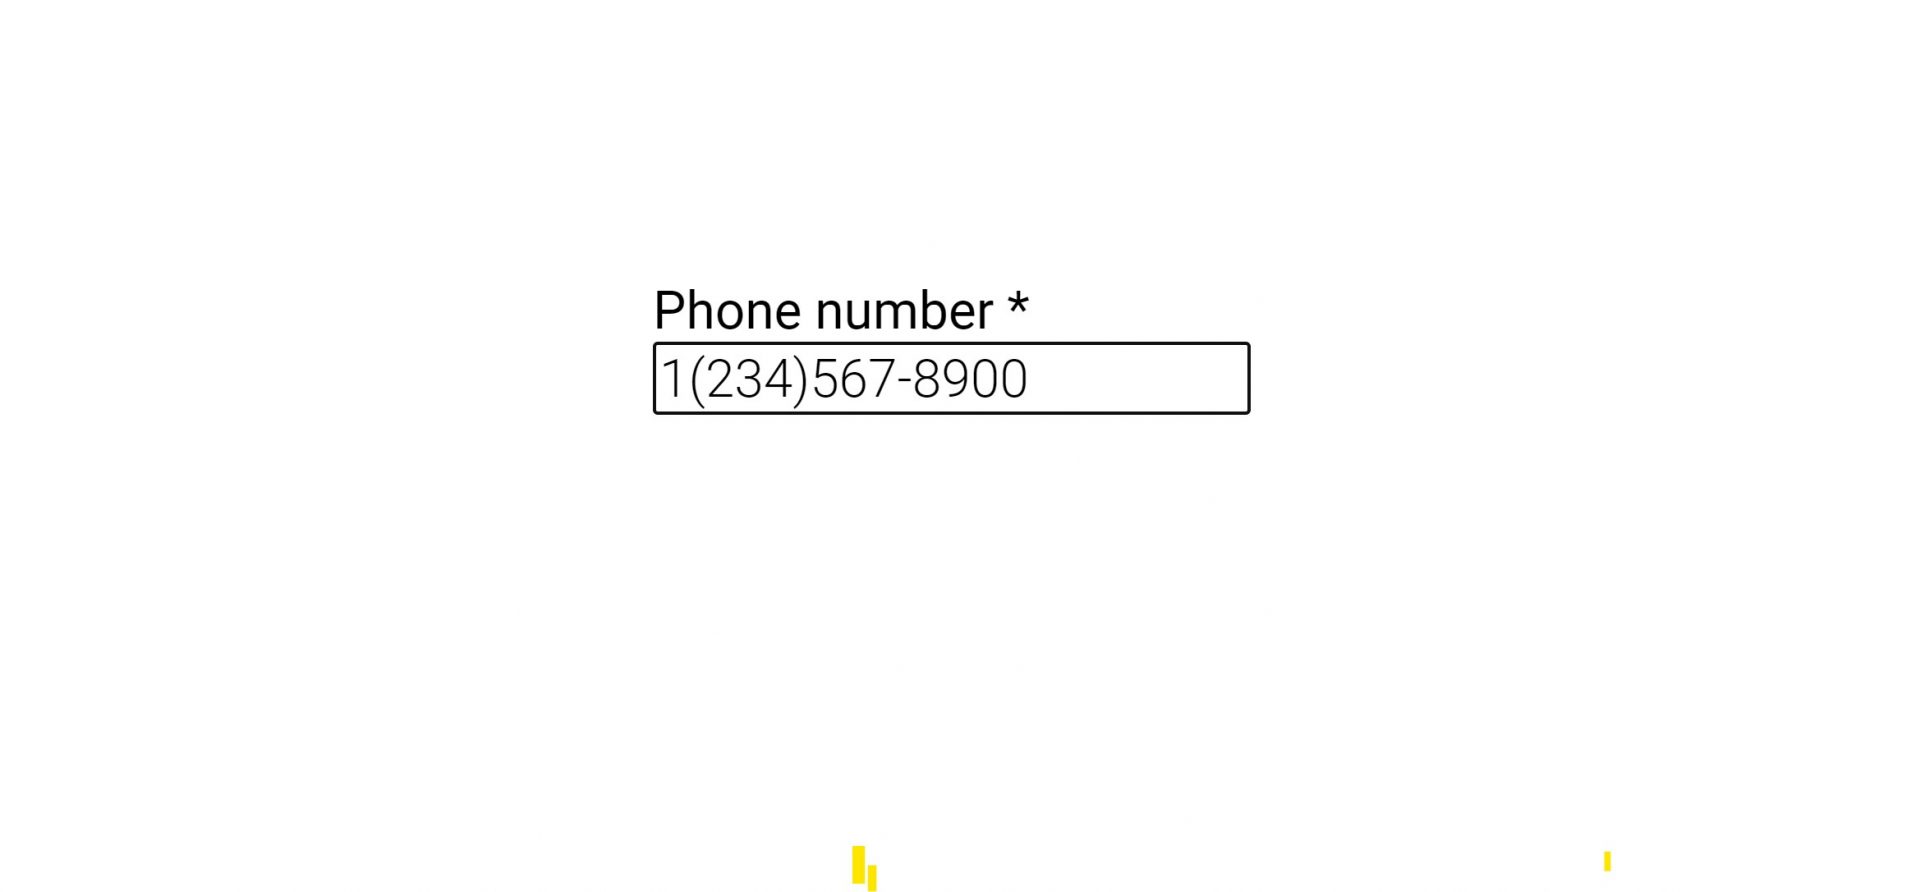 Auto format or Masking phone number or te input field